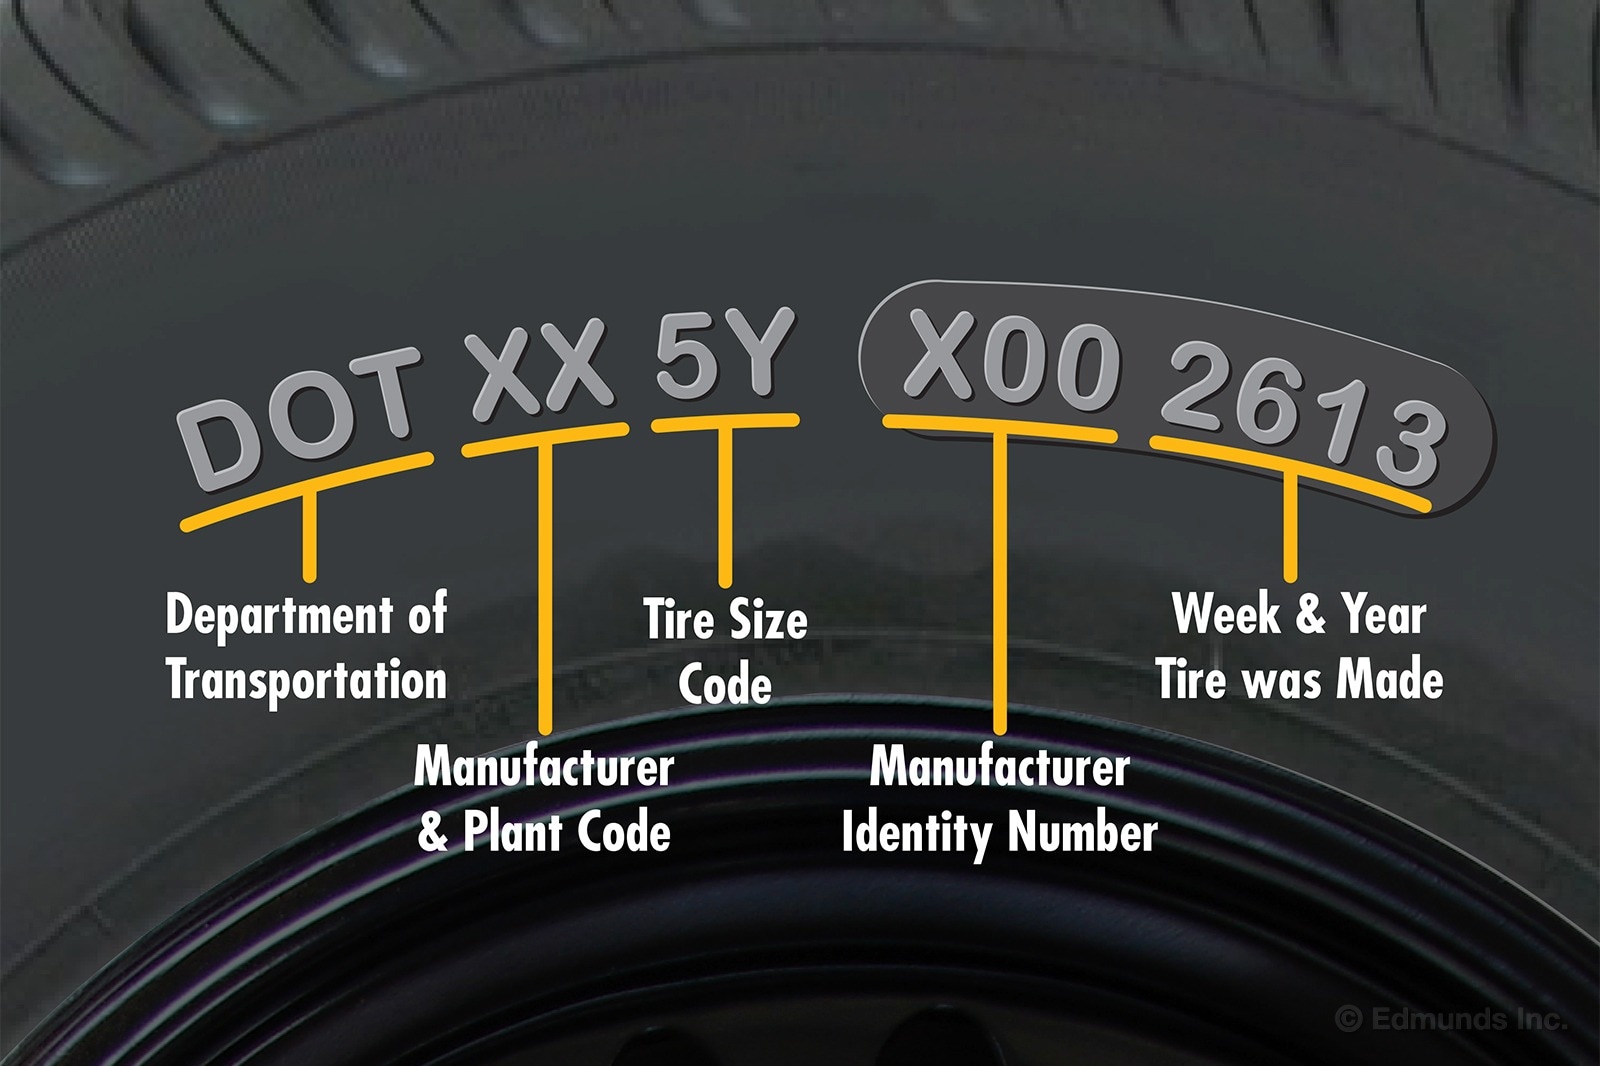 How Can You Tell When a Tire was Made 